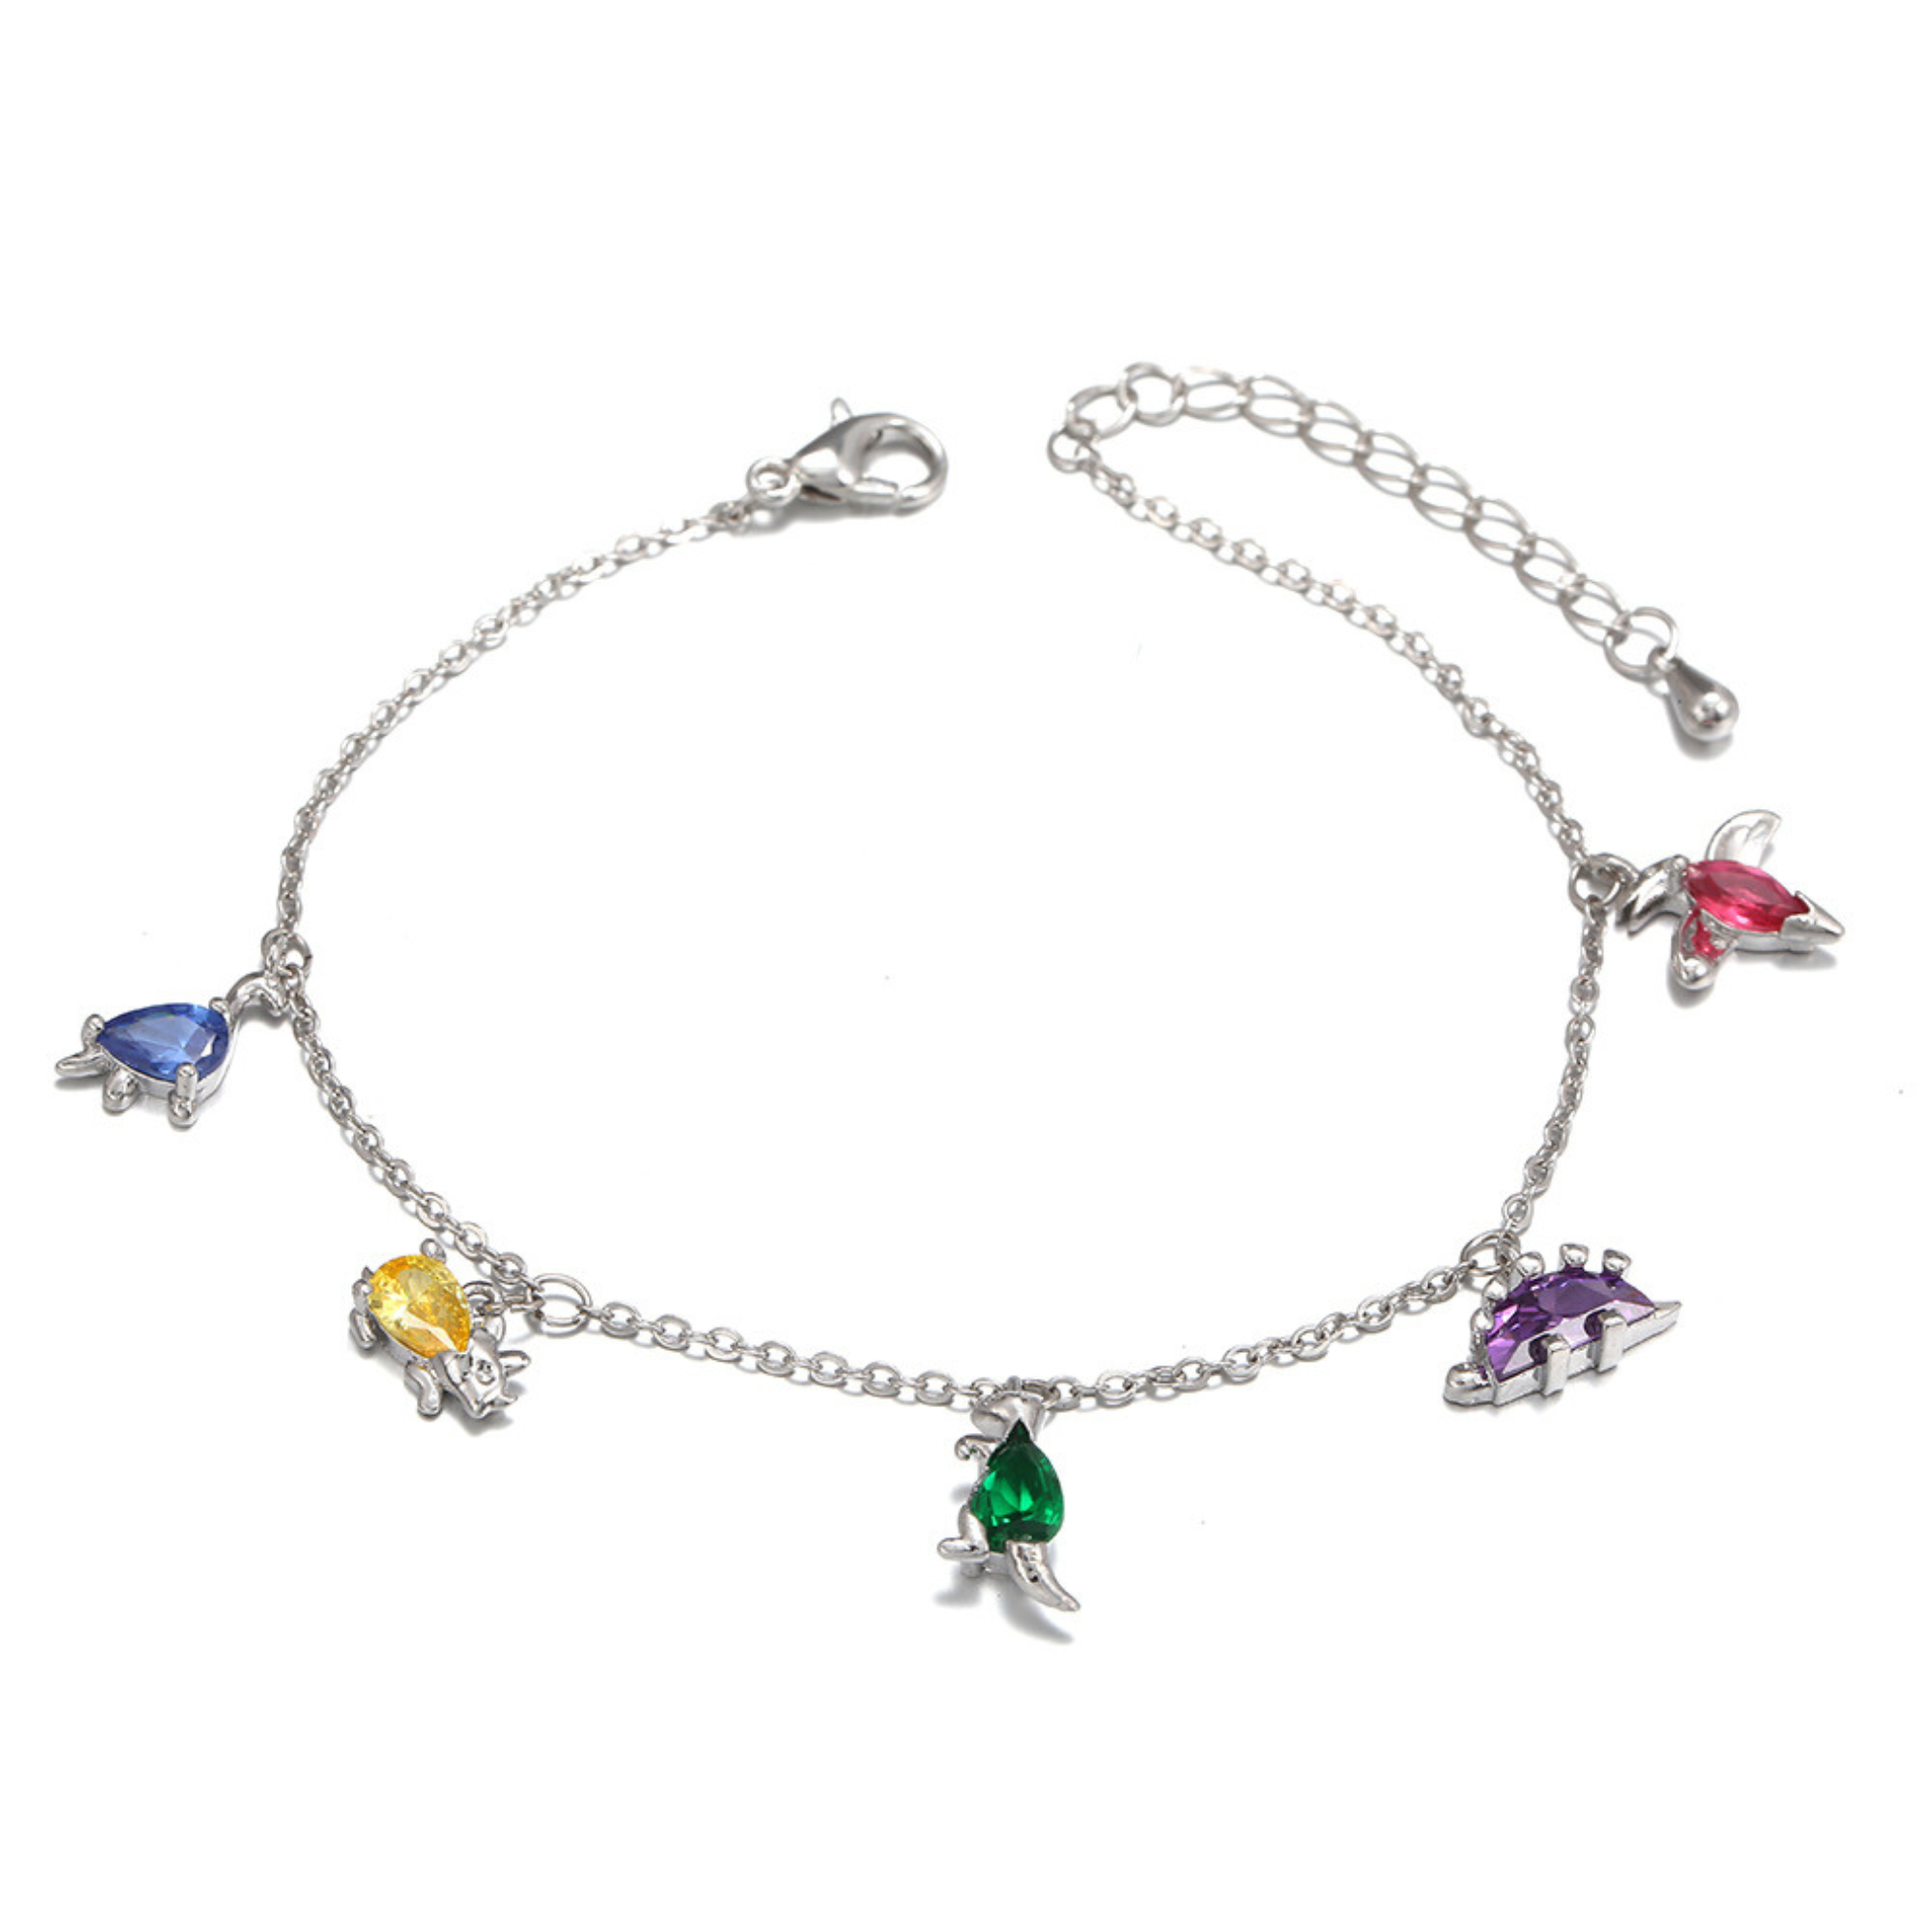 a silver bracelet with colorful stones